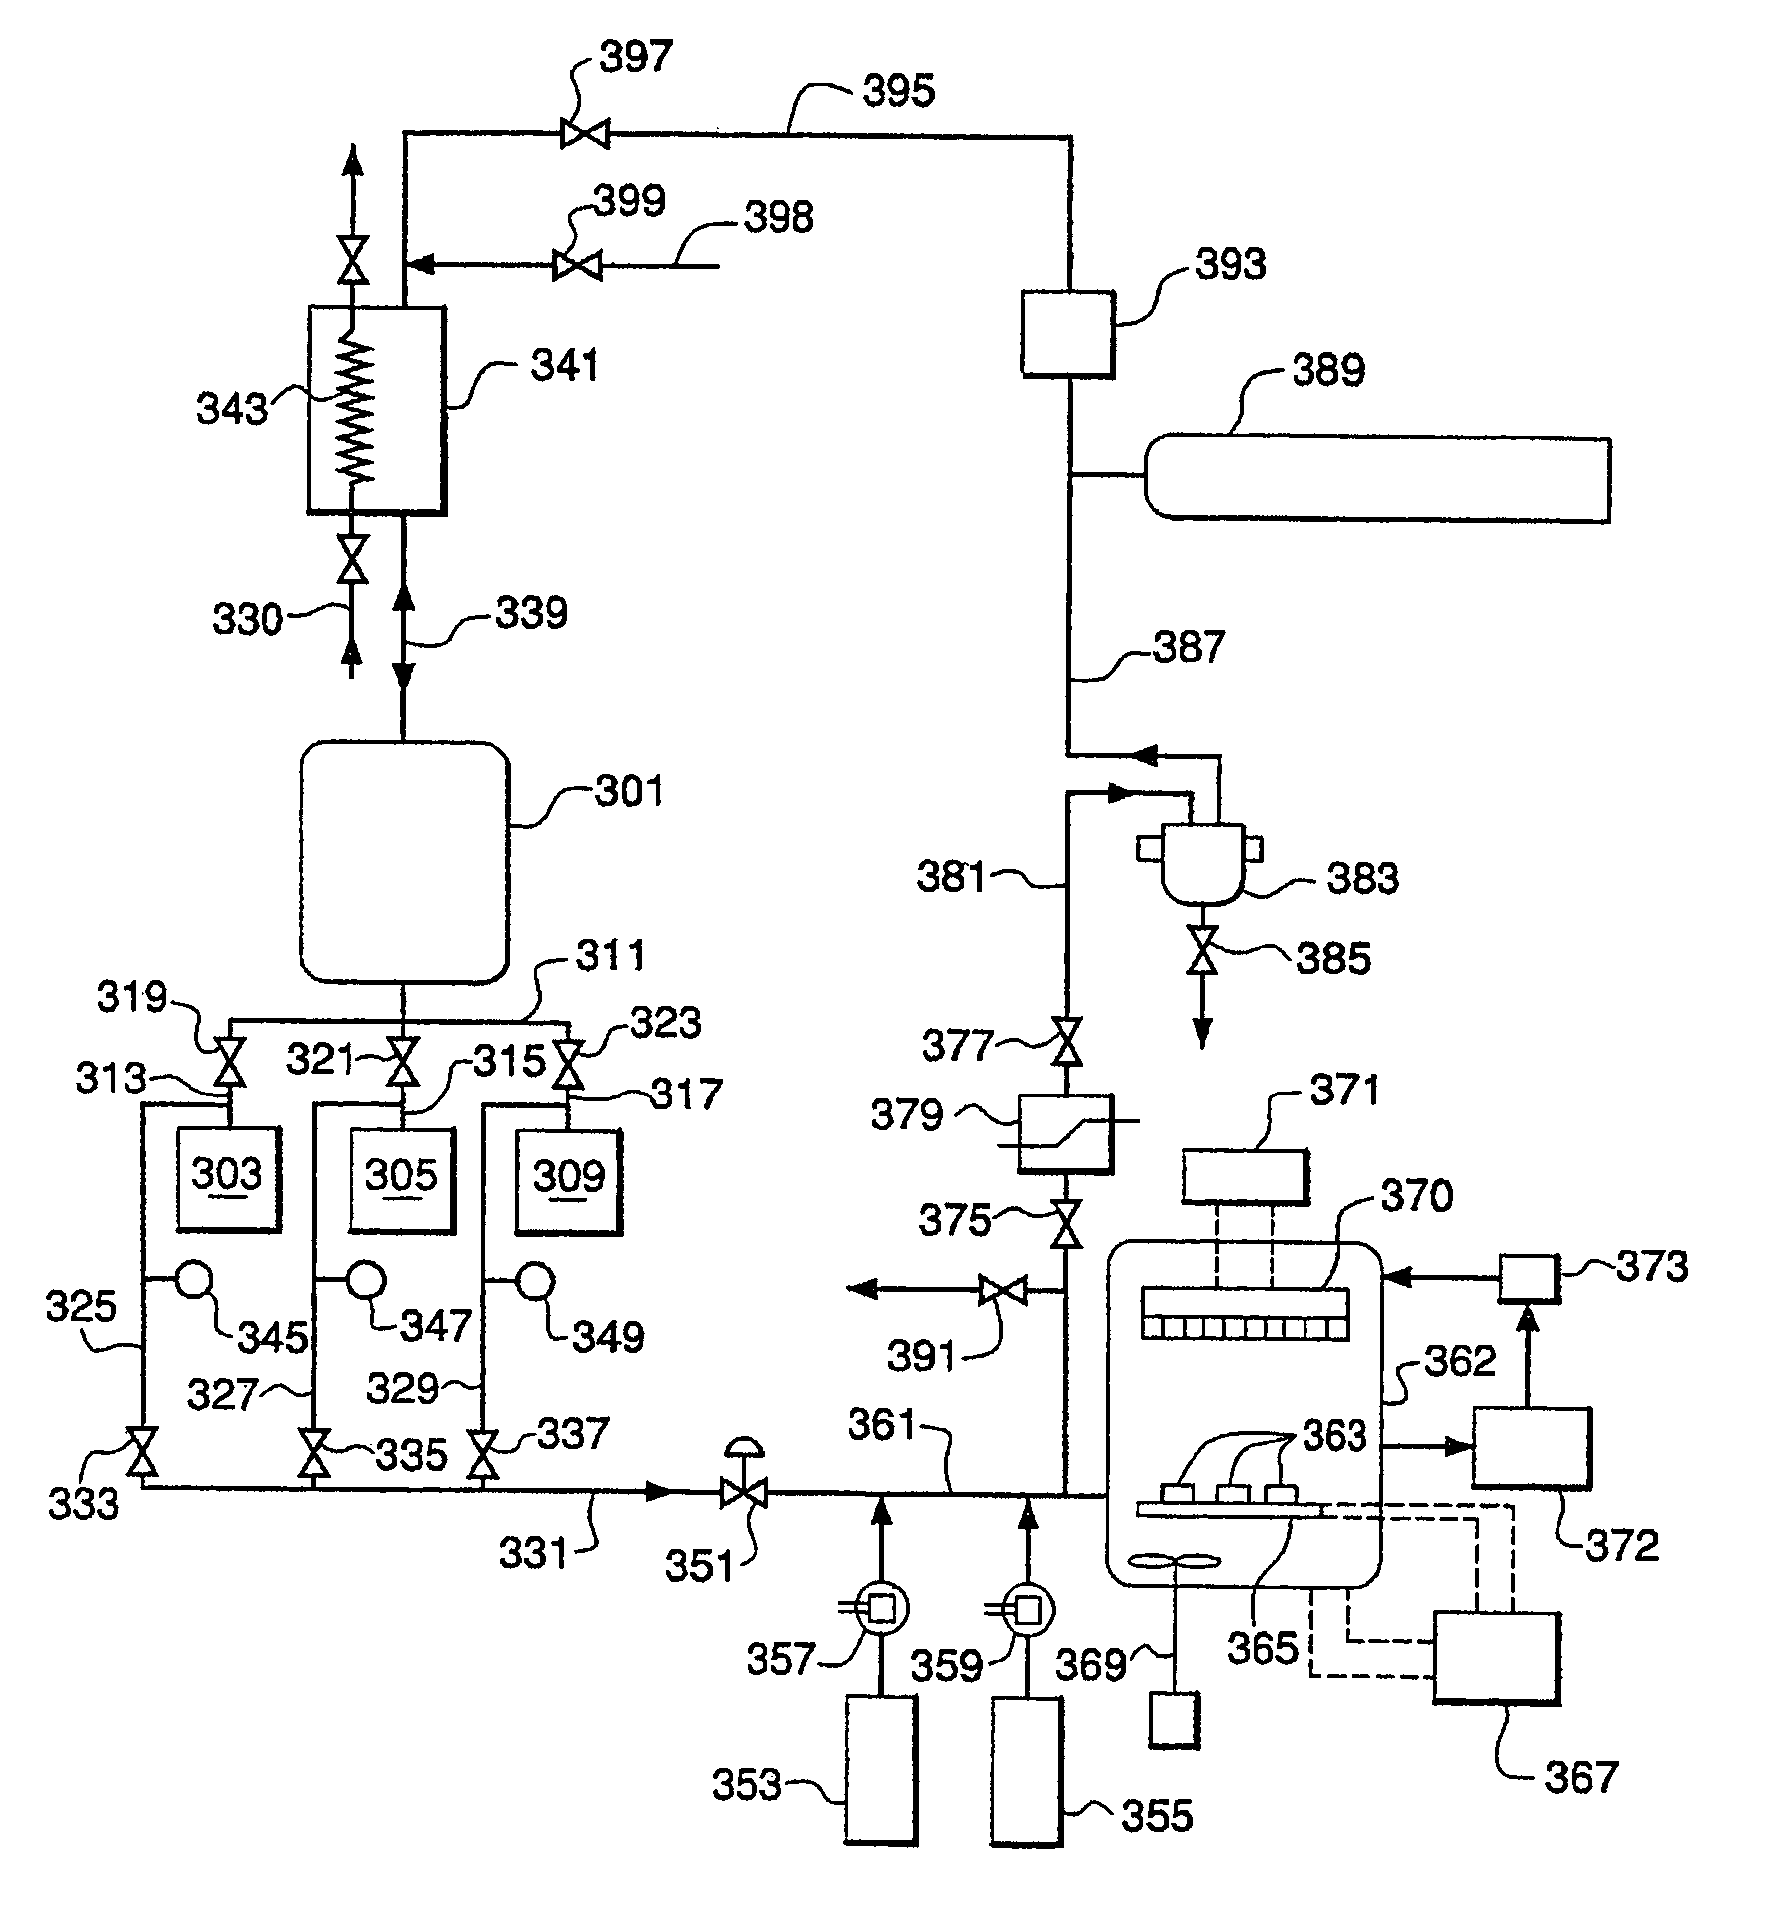 Processing of semiconductor components with dense processing fluids and ultrasonic energy